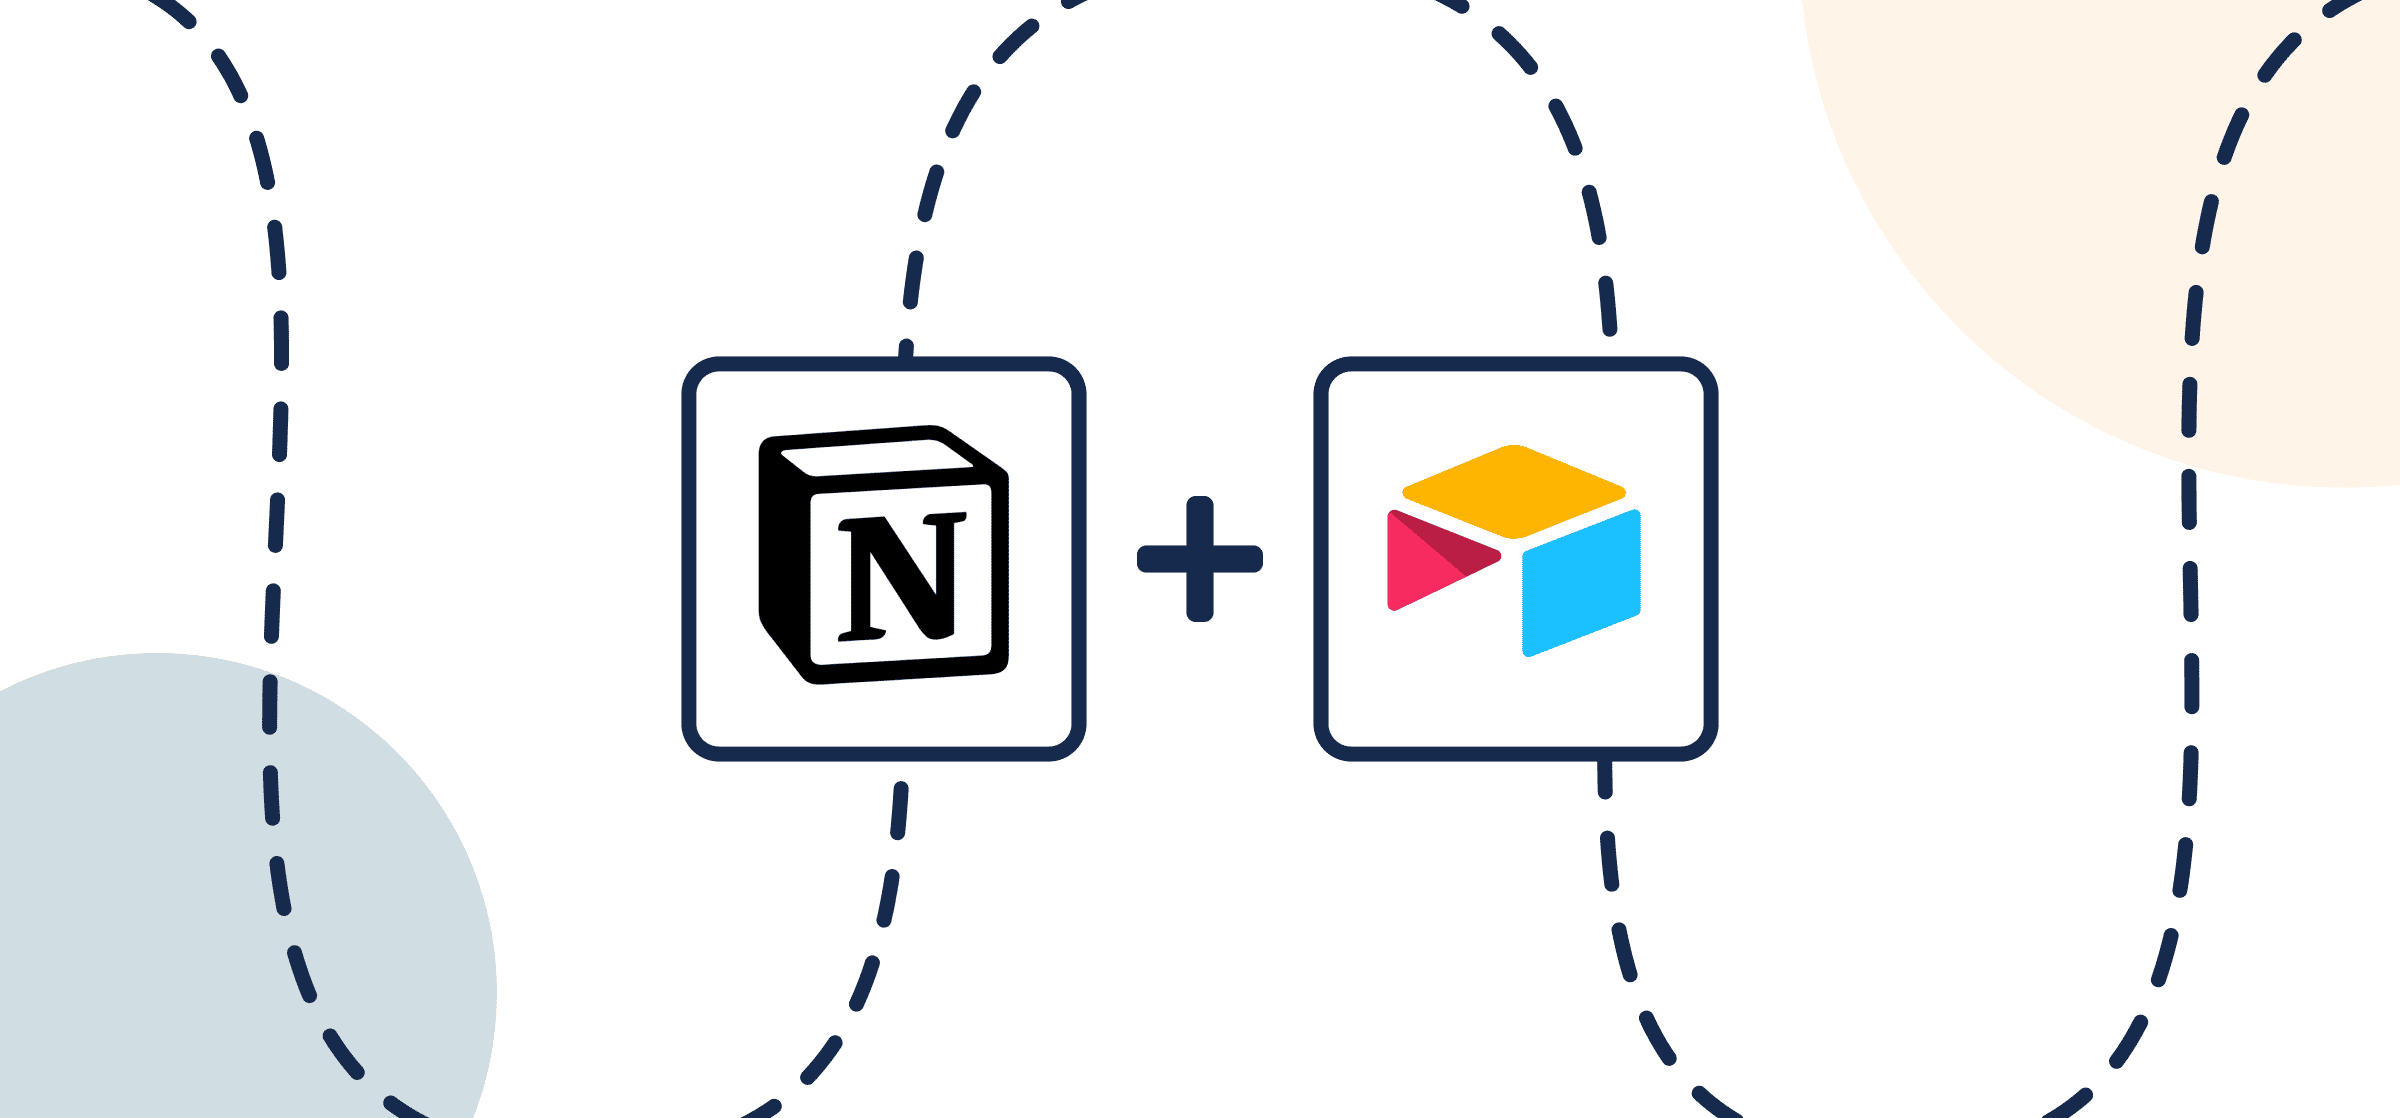 Featured image with Logos for Airtable and Notion, representing Unito's guide to syncing Airtable and Notion work items with a 2-way integration.